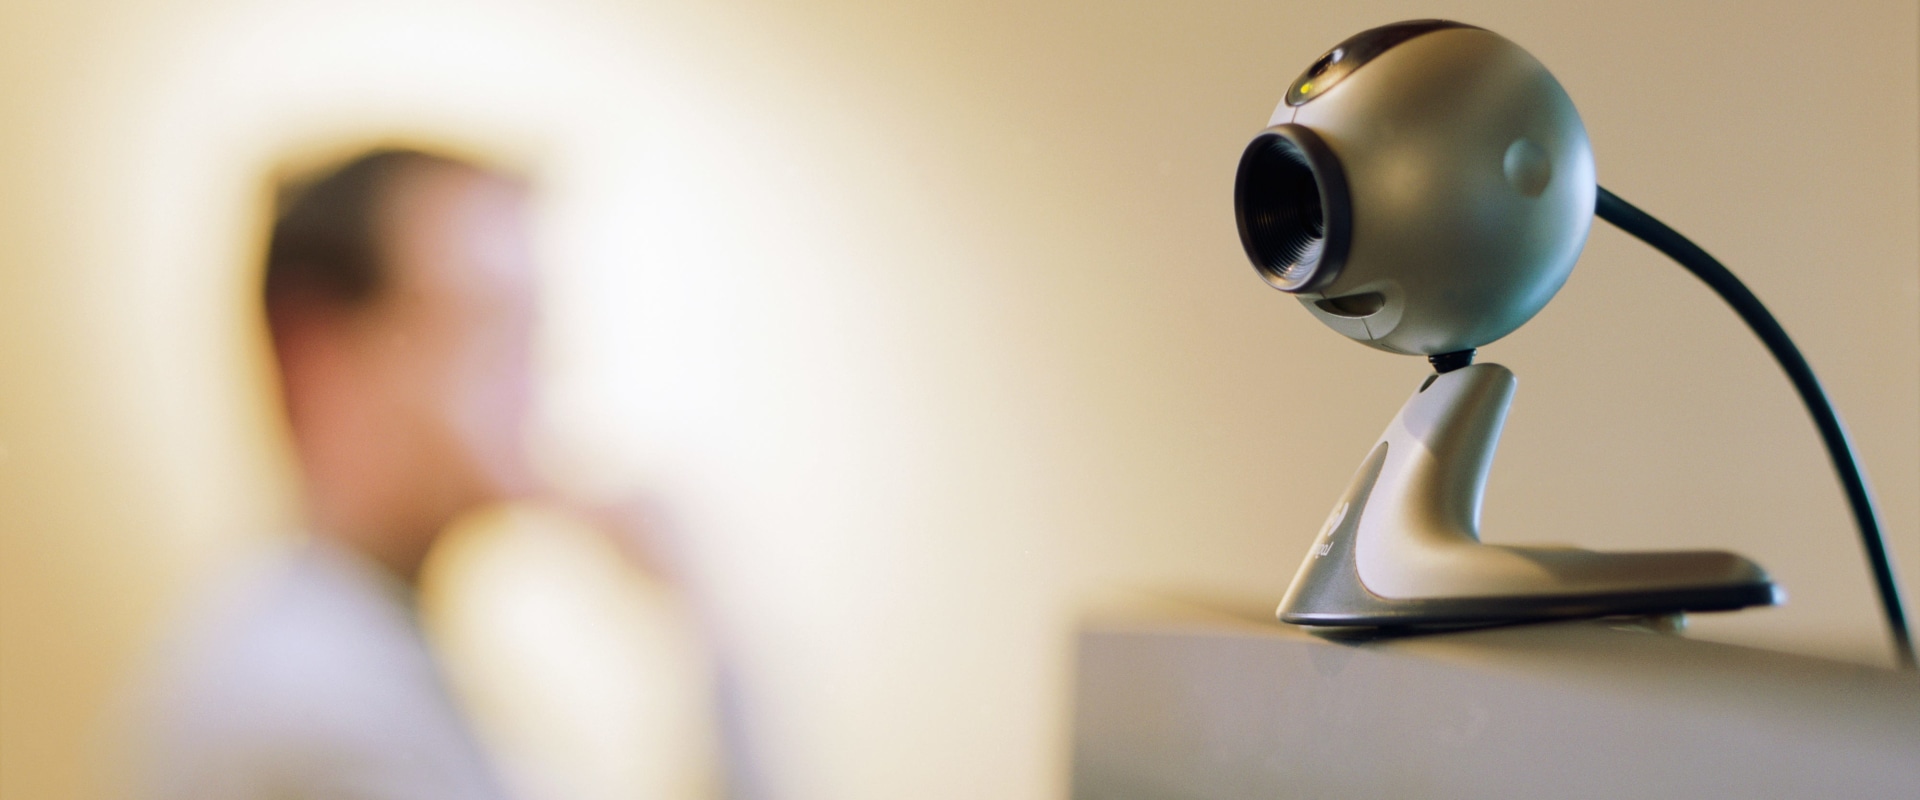 Everything You Need to Know About Webcams